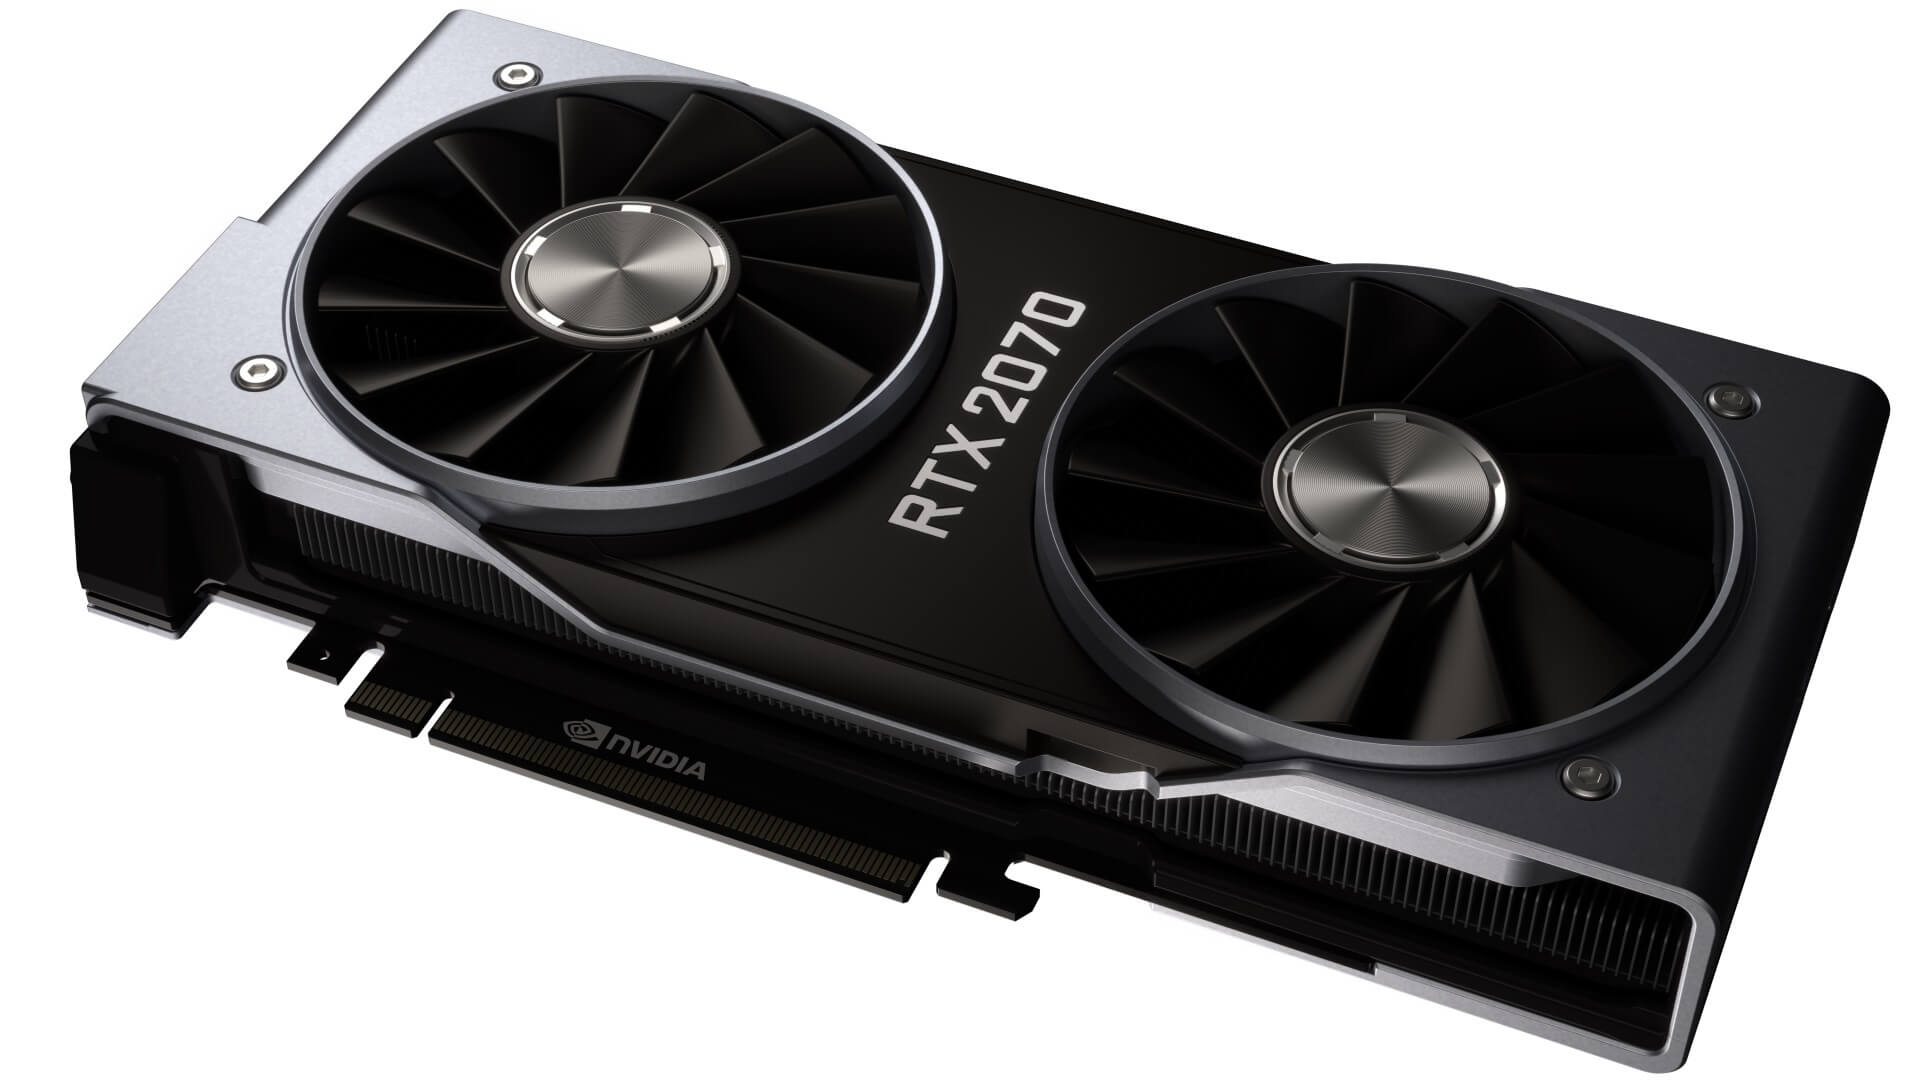 Nvidia is ready to ship the RTX 2070 on October 17